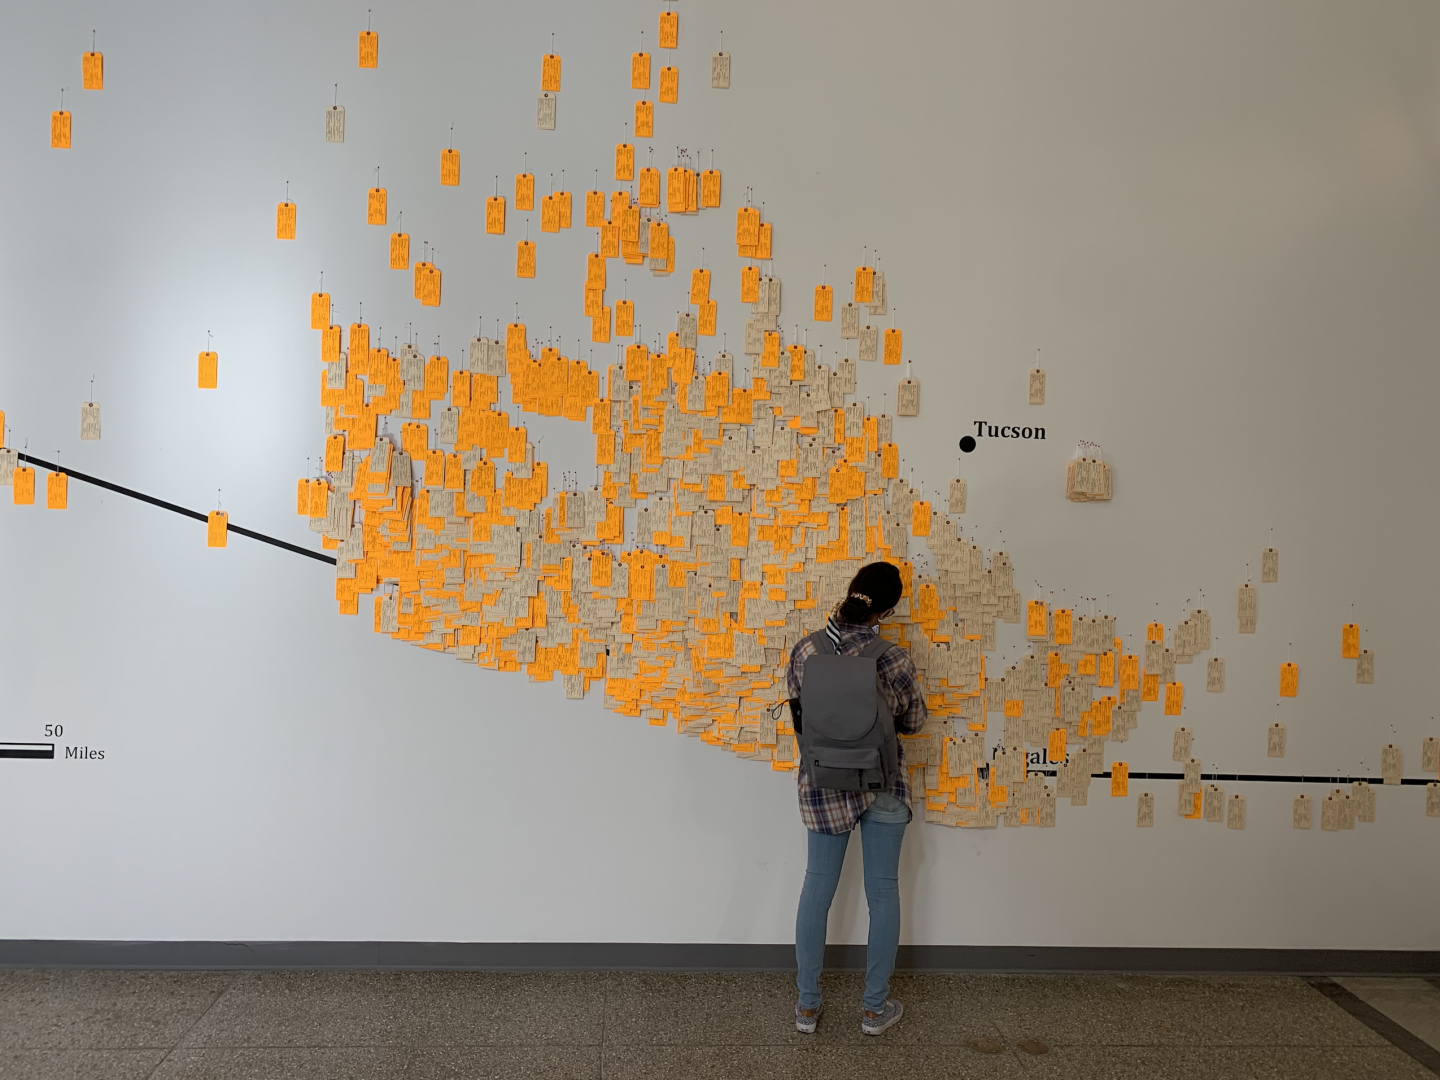 The photo is of the Hostile Terrain 94 exhibition at another university. A map of the Arizona-Mexico border is displayed on the wall and thousands of toe tags hang from individual map pins placed in the wall at the exact location where human remains of border crossers were discovered. A young woman stands in front of the exhibition, reading toe tags.